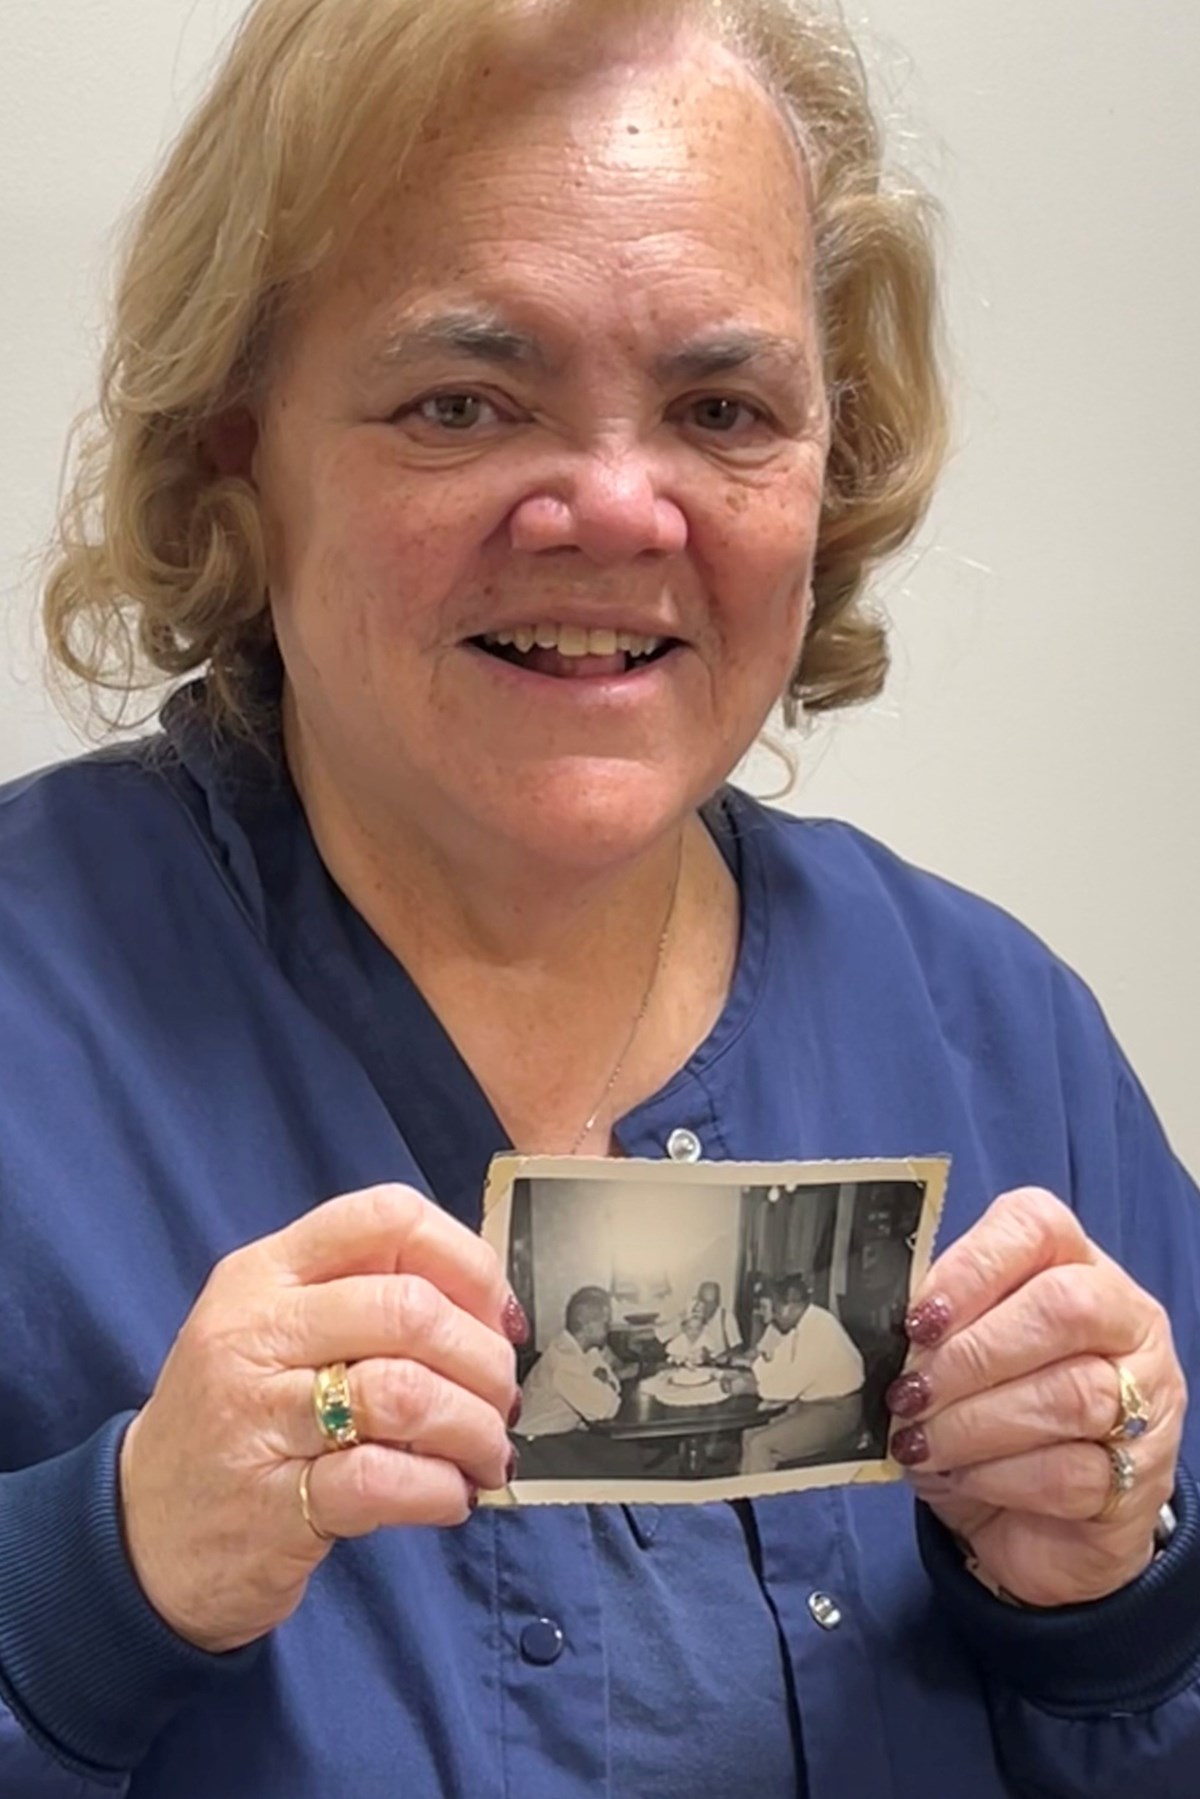 A woman smiles for a picture while holding an old black and white photograph